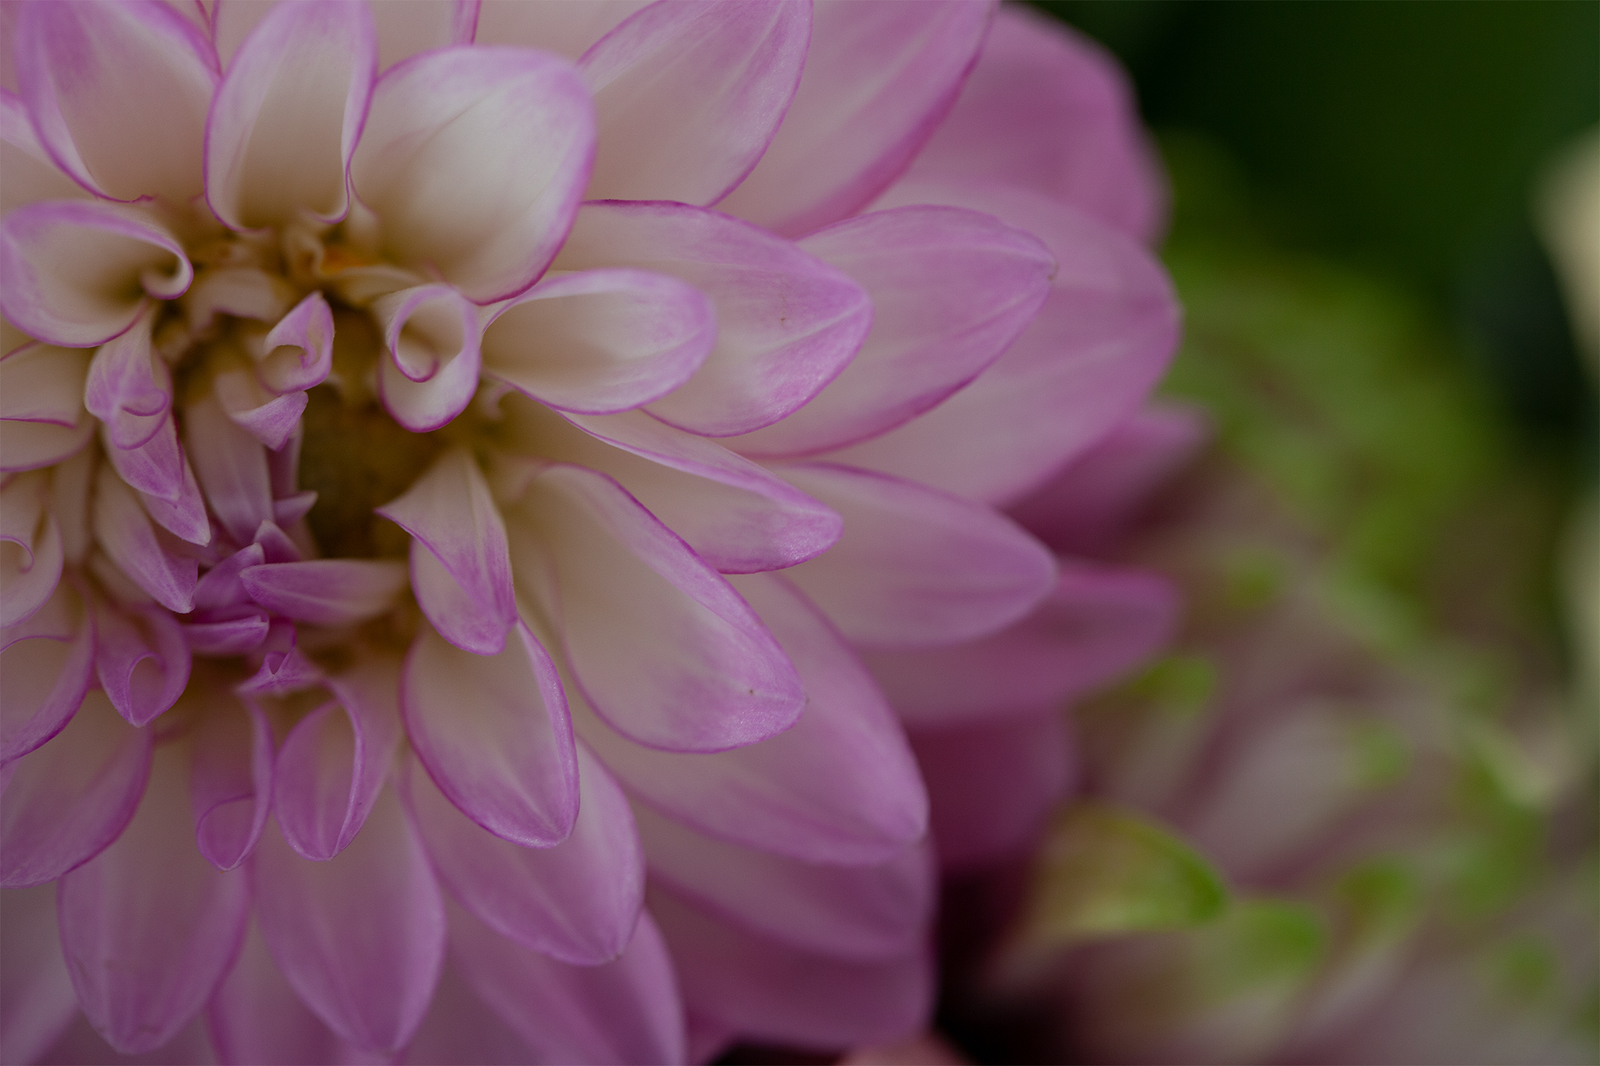 Image of a pink chrysanthemum before processing with textures